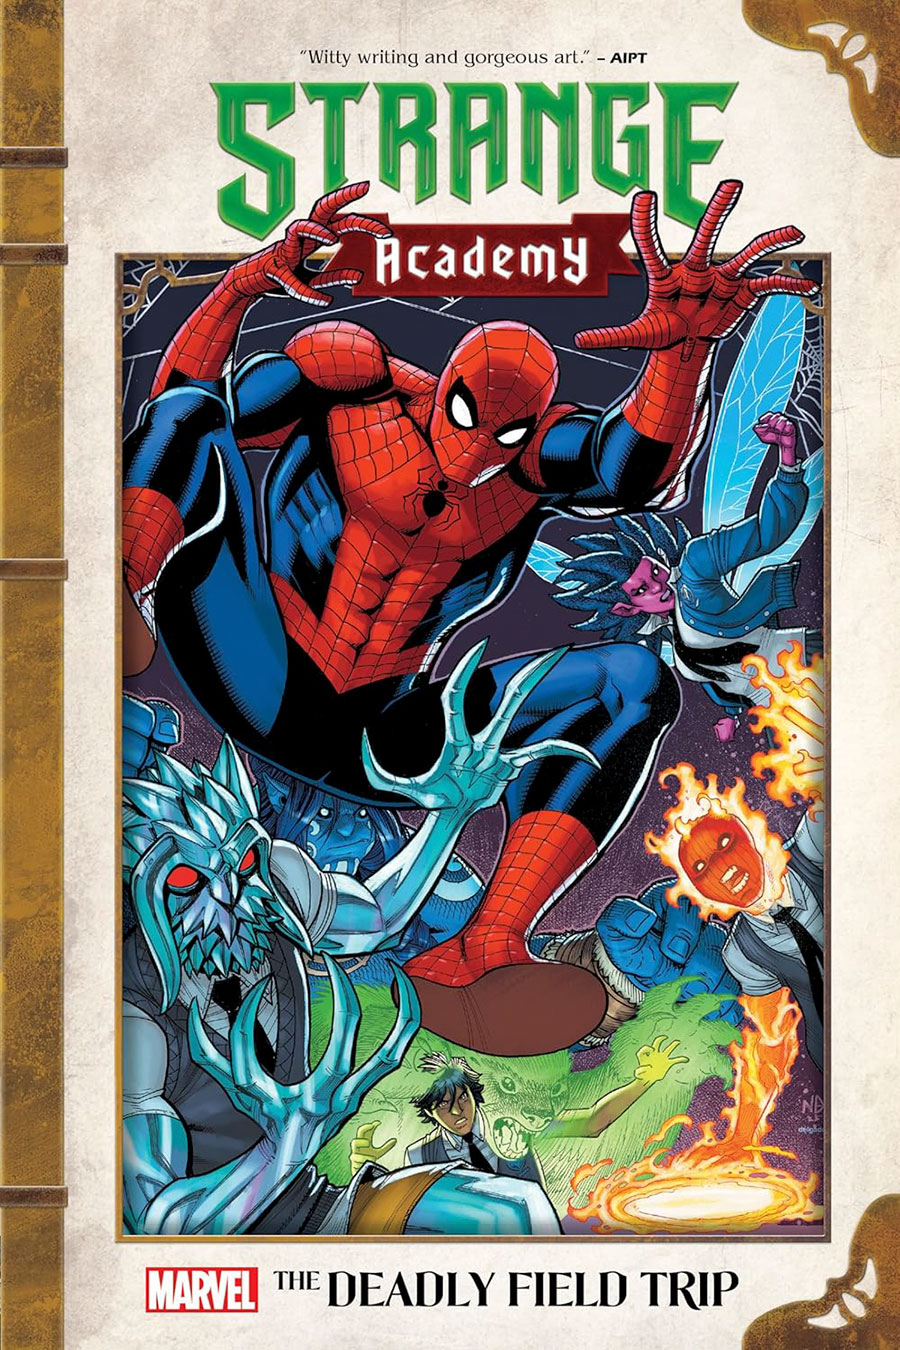 Strange Academy The Deadly Field Trip GN